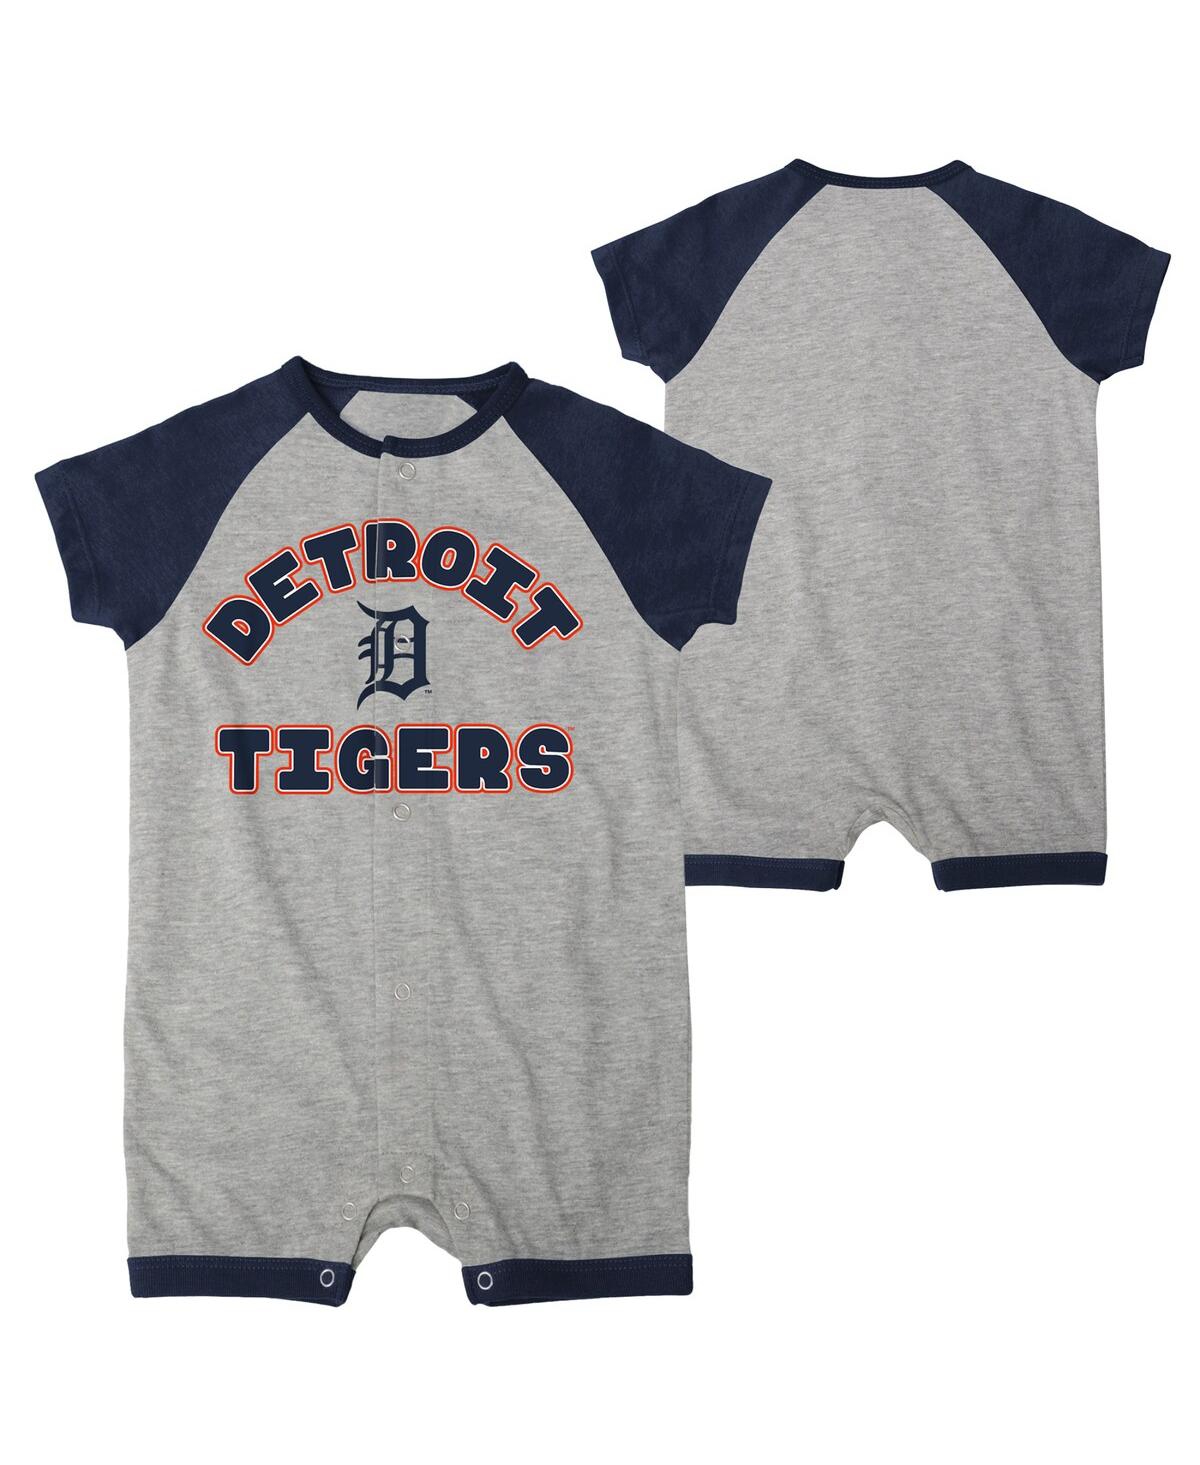 OUTERSTUFF NEWBORN AND INFANT BOYS AND GIRLS HEATHER GRAY DETROIT TIGERS EXTRA BASE HIT RAGLAN FULL-SNAP ROMPER